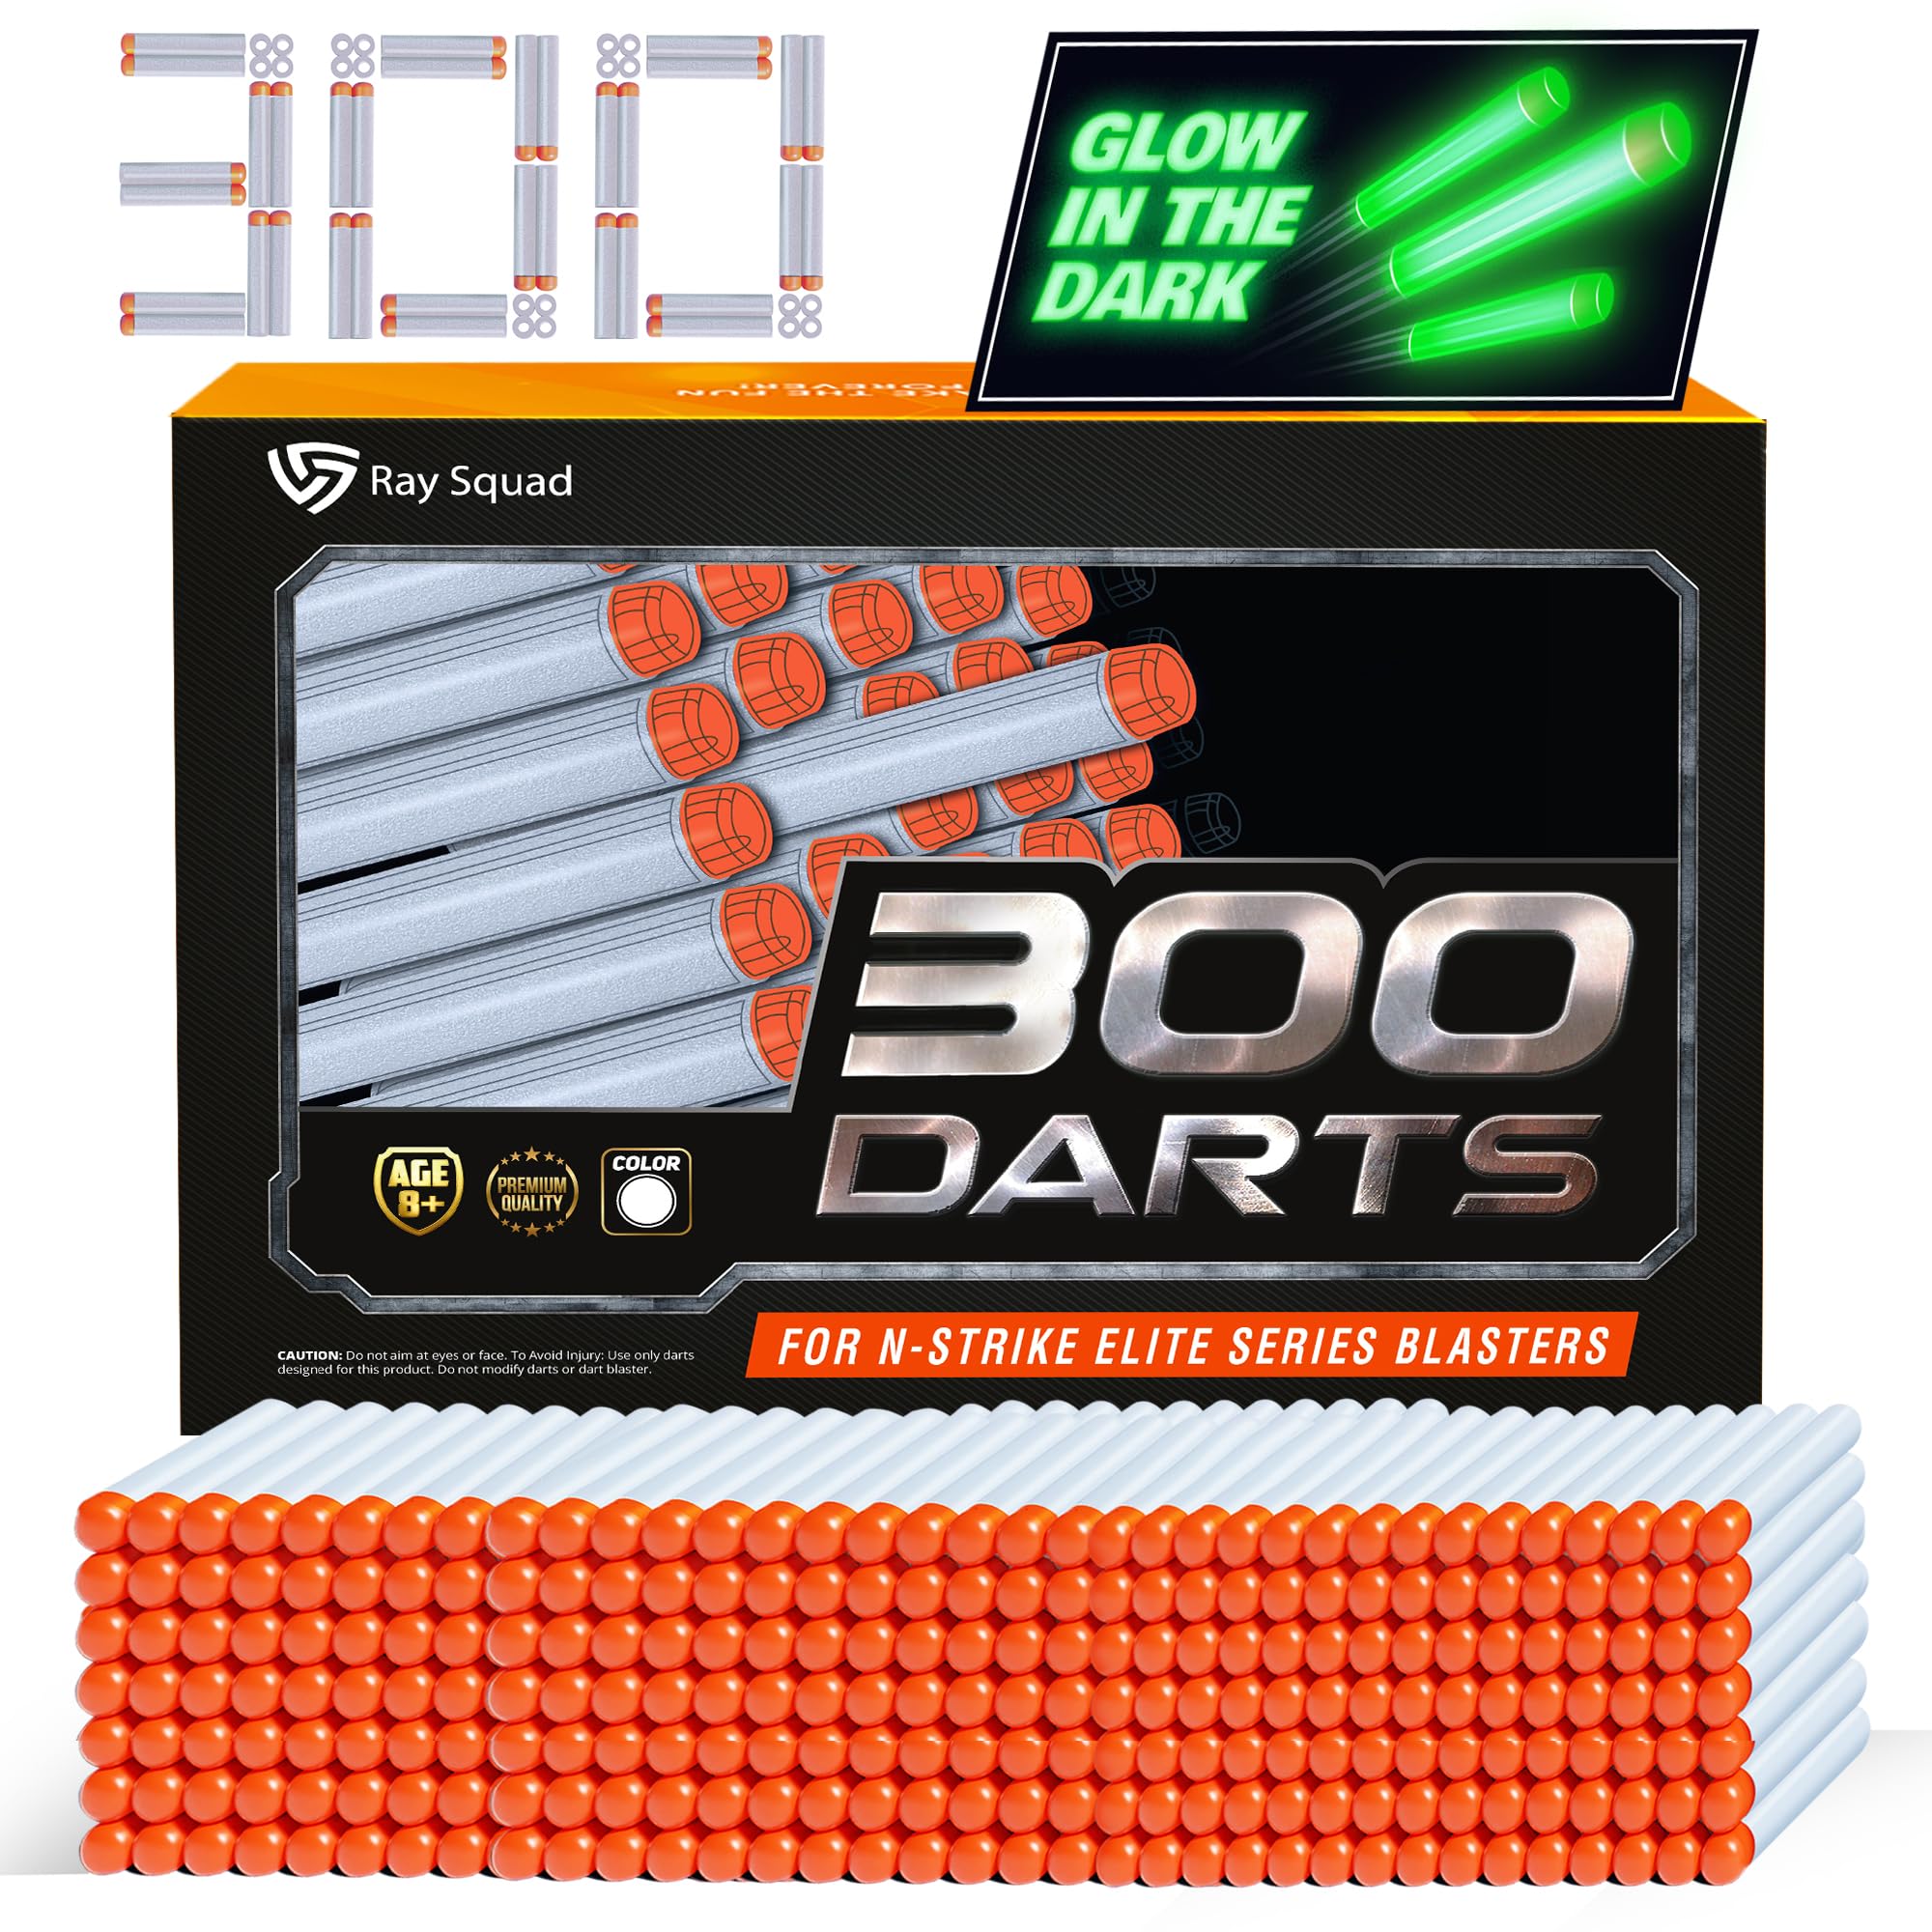 Ray Squad (300 Pack) Glow in The Dark Darts, Nerf Darts Bulk - Nerf Bullet, Nerfbullets, Nerf Dart, Nerf Elite Darts Refill, Nerf Ammo Bullets, Nerf Refill Darts, Nerf Bullets, Nerf Gun Bullets